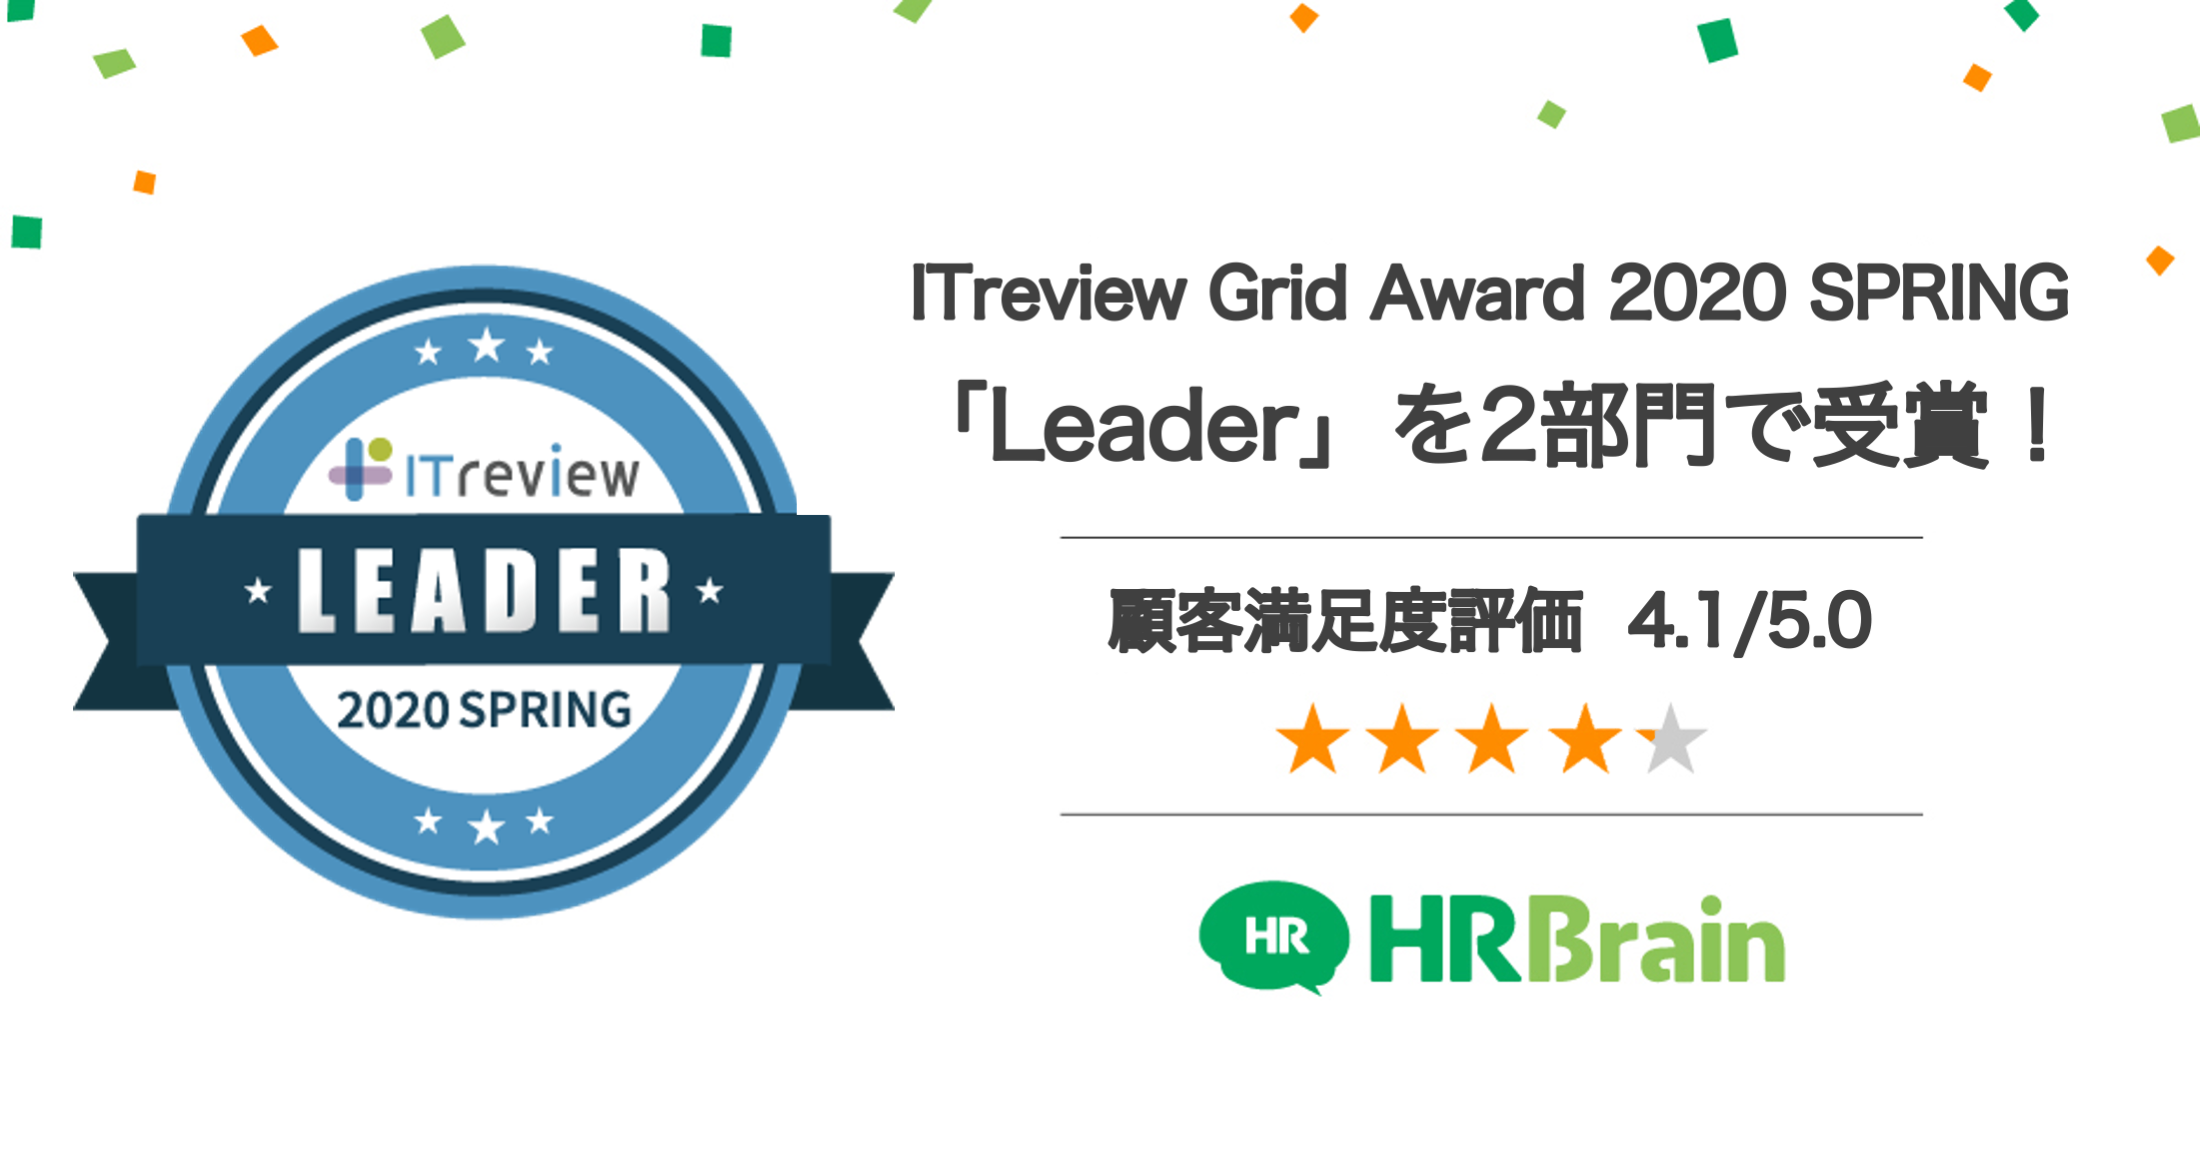 「HRBrain」、「ITreview Grid Award 2020 Spring」の2部門で「Leader」獲得